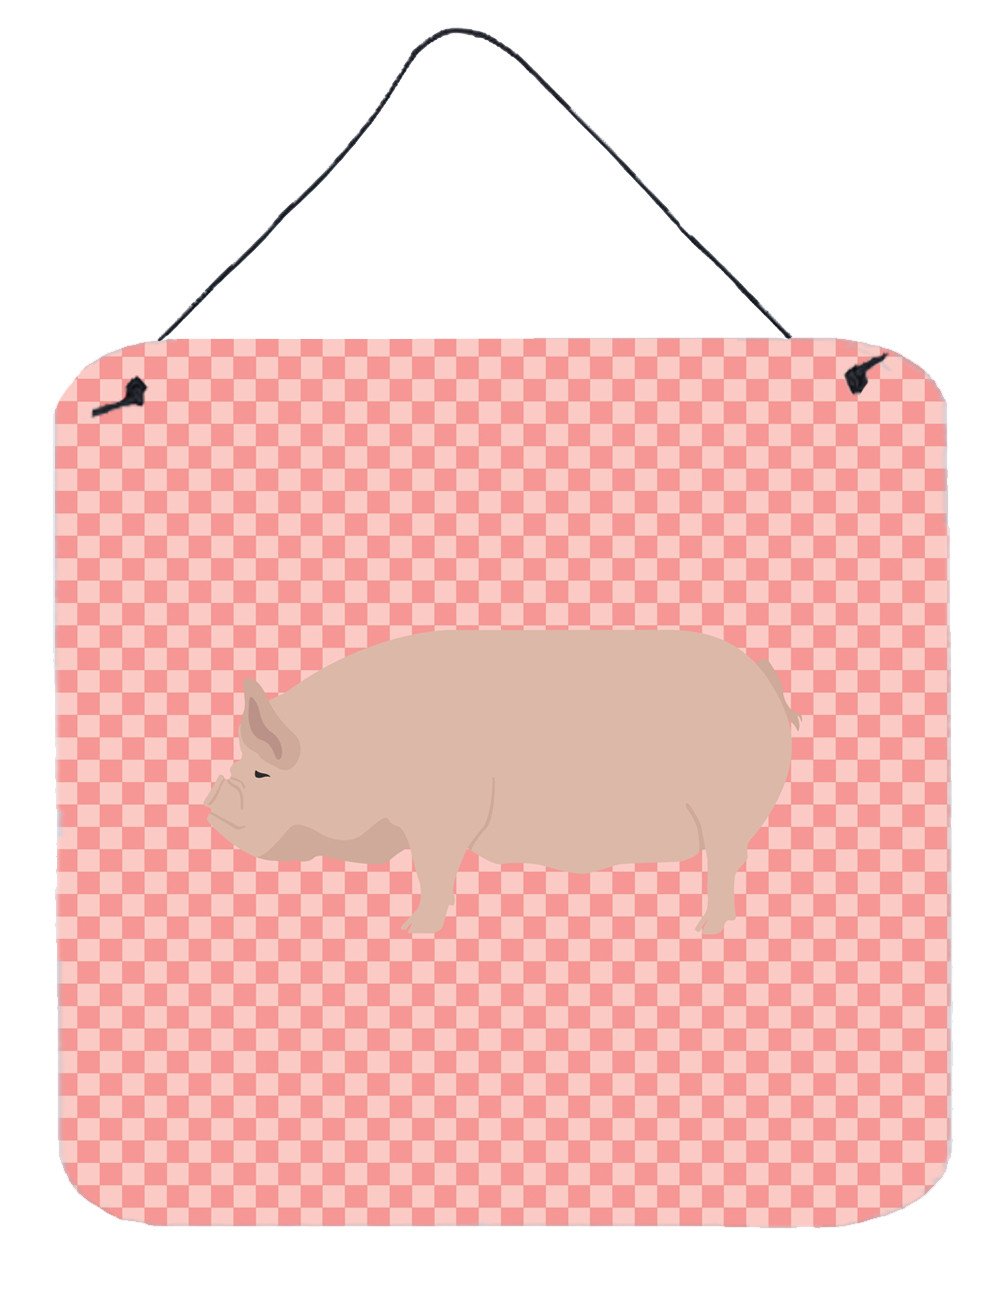 Welsh Pig Pink Check Wall or Door Hanging Prints BB7937DS66 by Caroline's Treasures